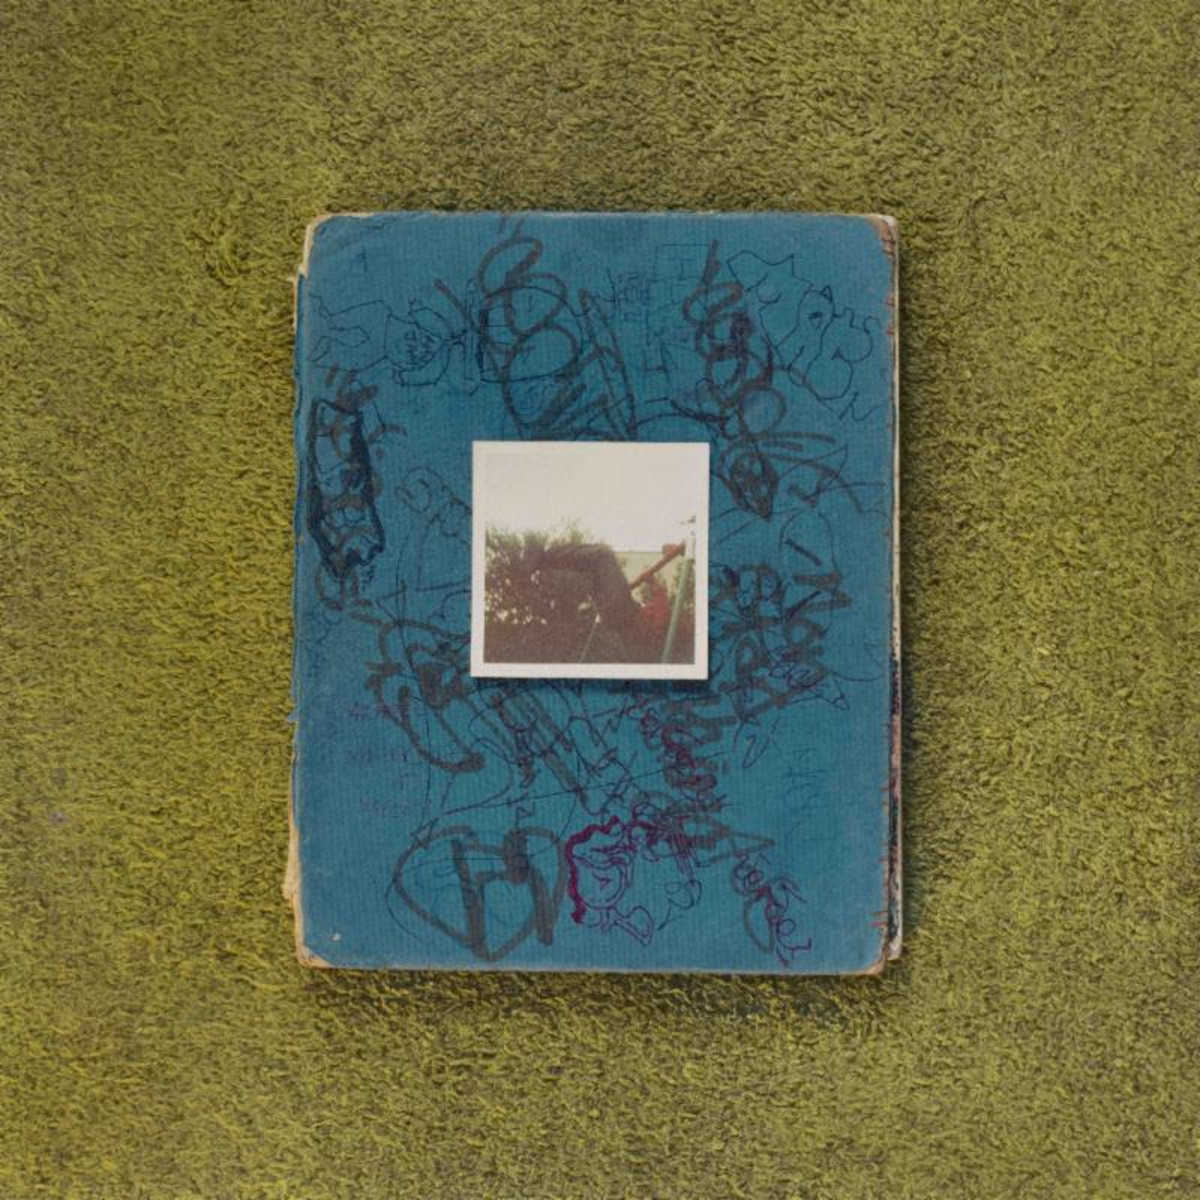 Black Thought Salaam Remi Streams Of Conscious Pt. 2